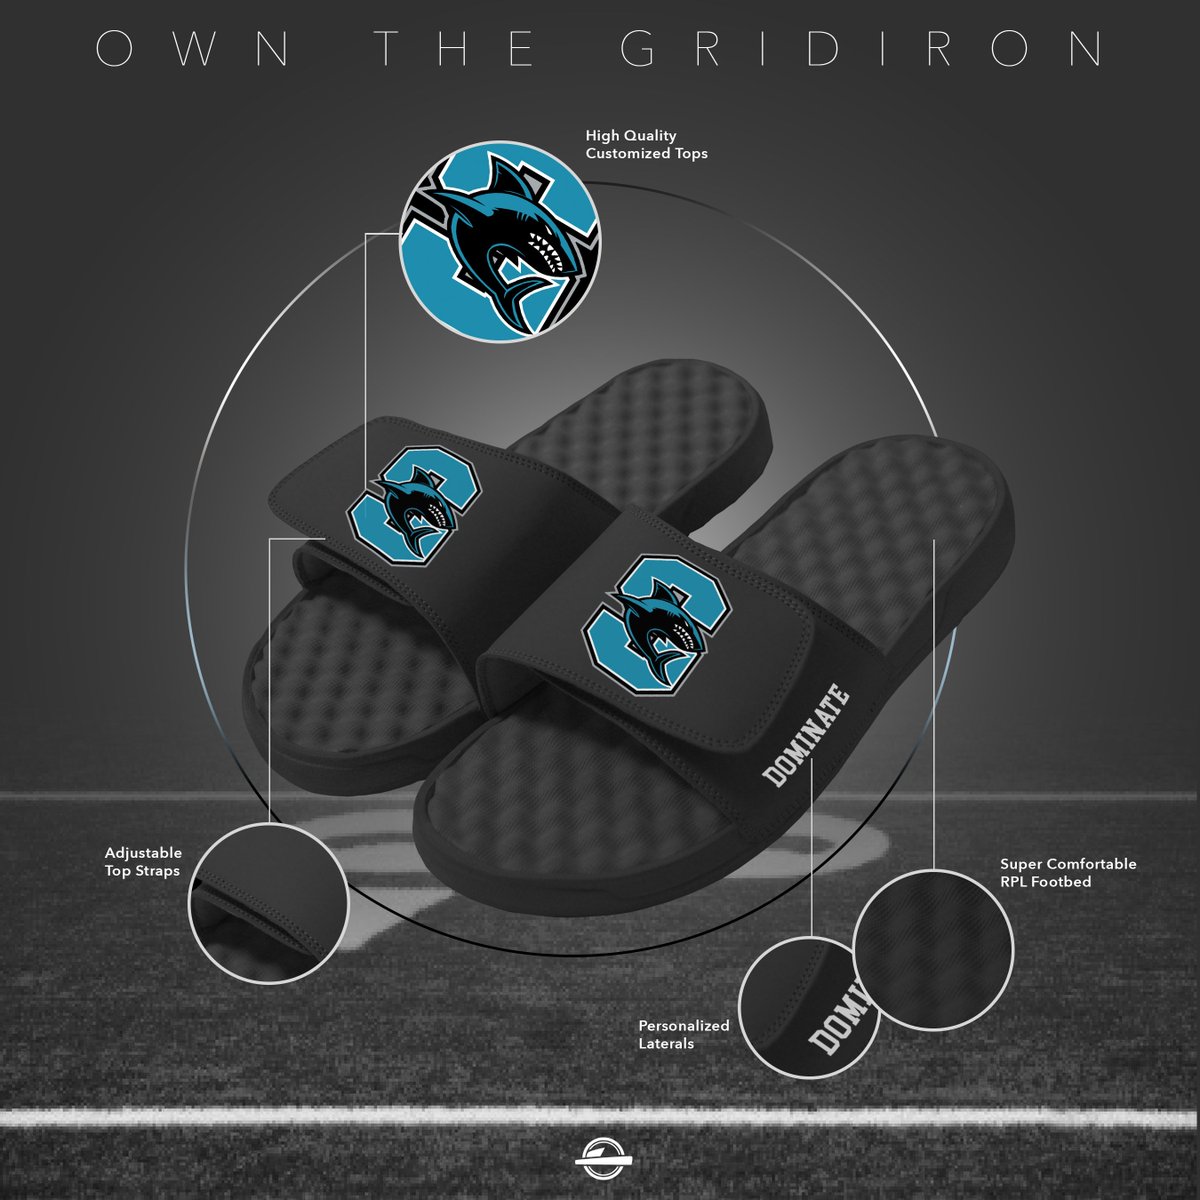 Rep your team this season by standing in what you stand for with ISlide! #checkthefootwork #GridironGear